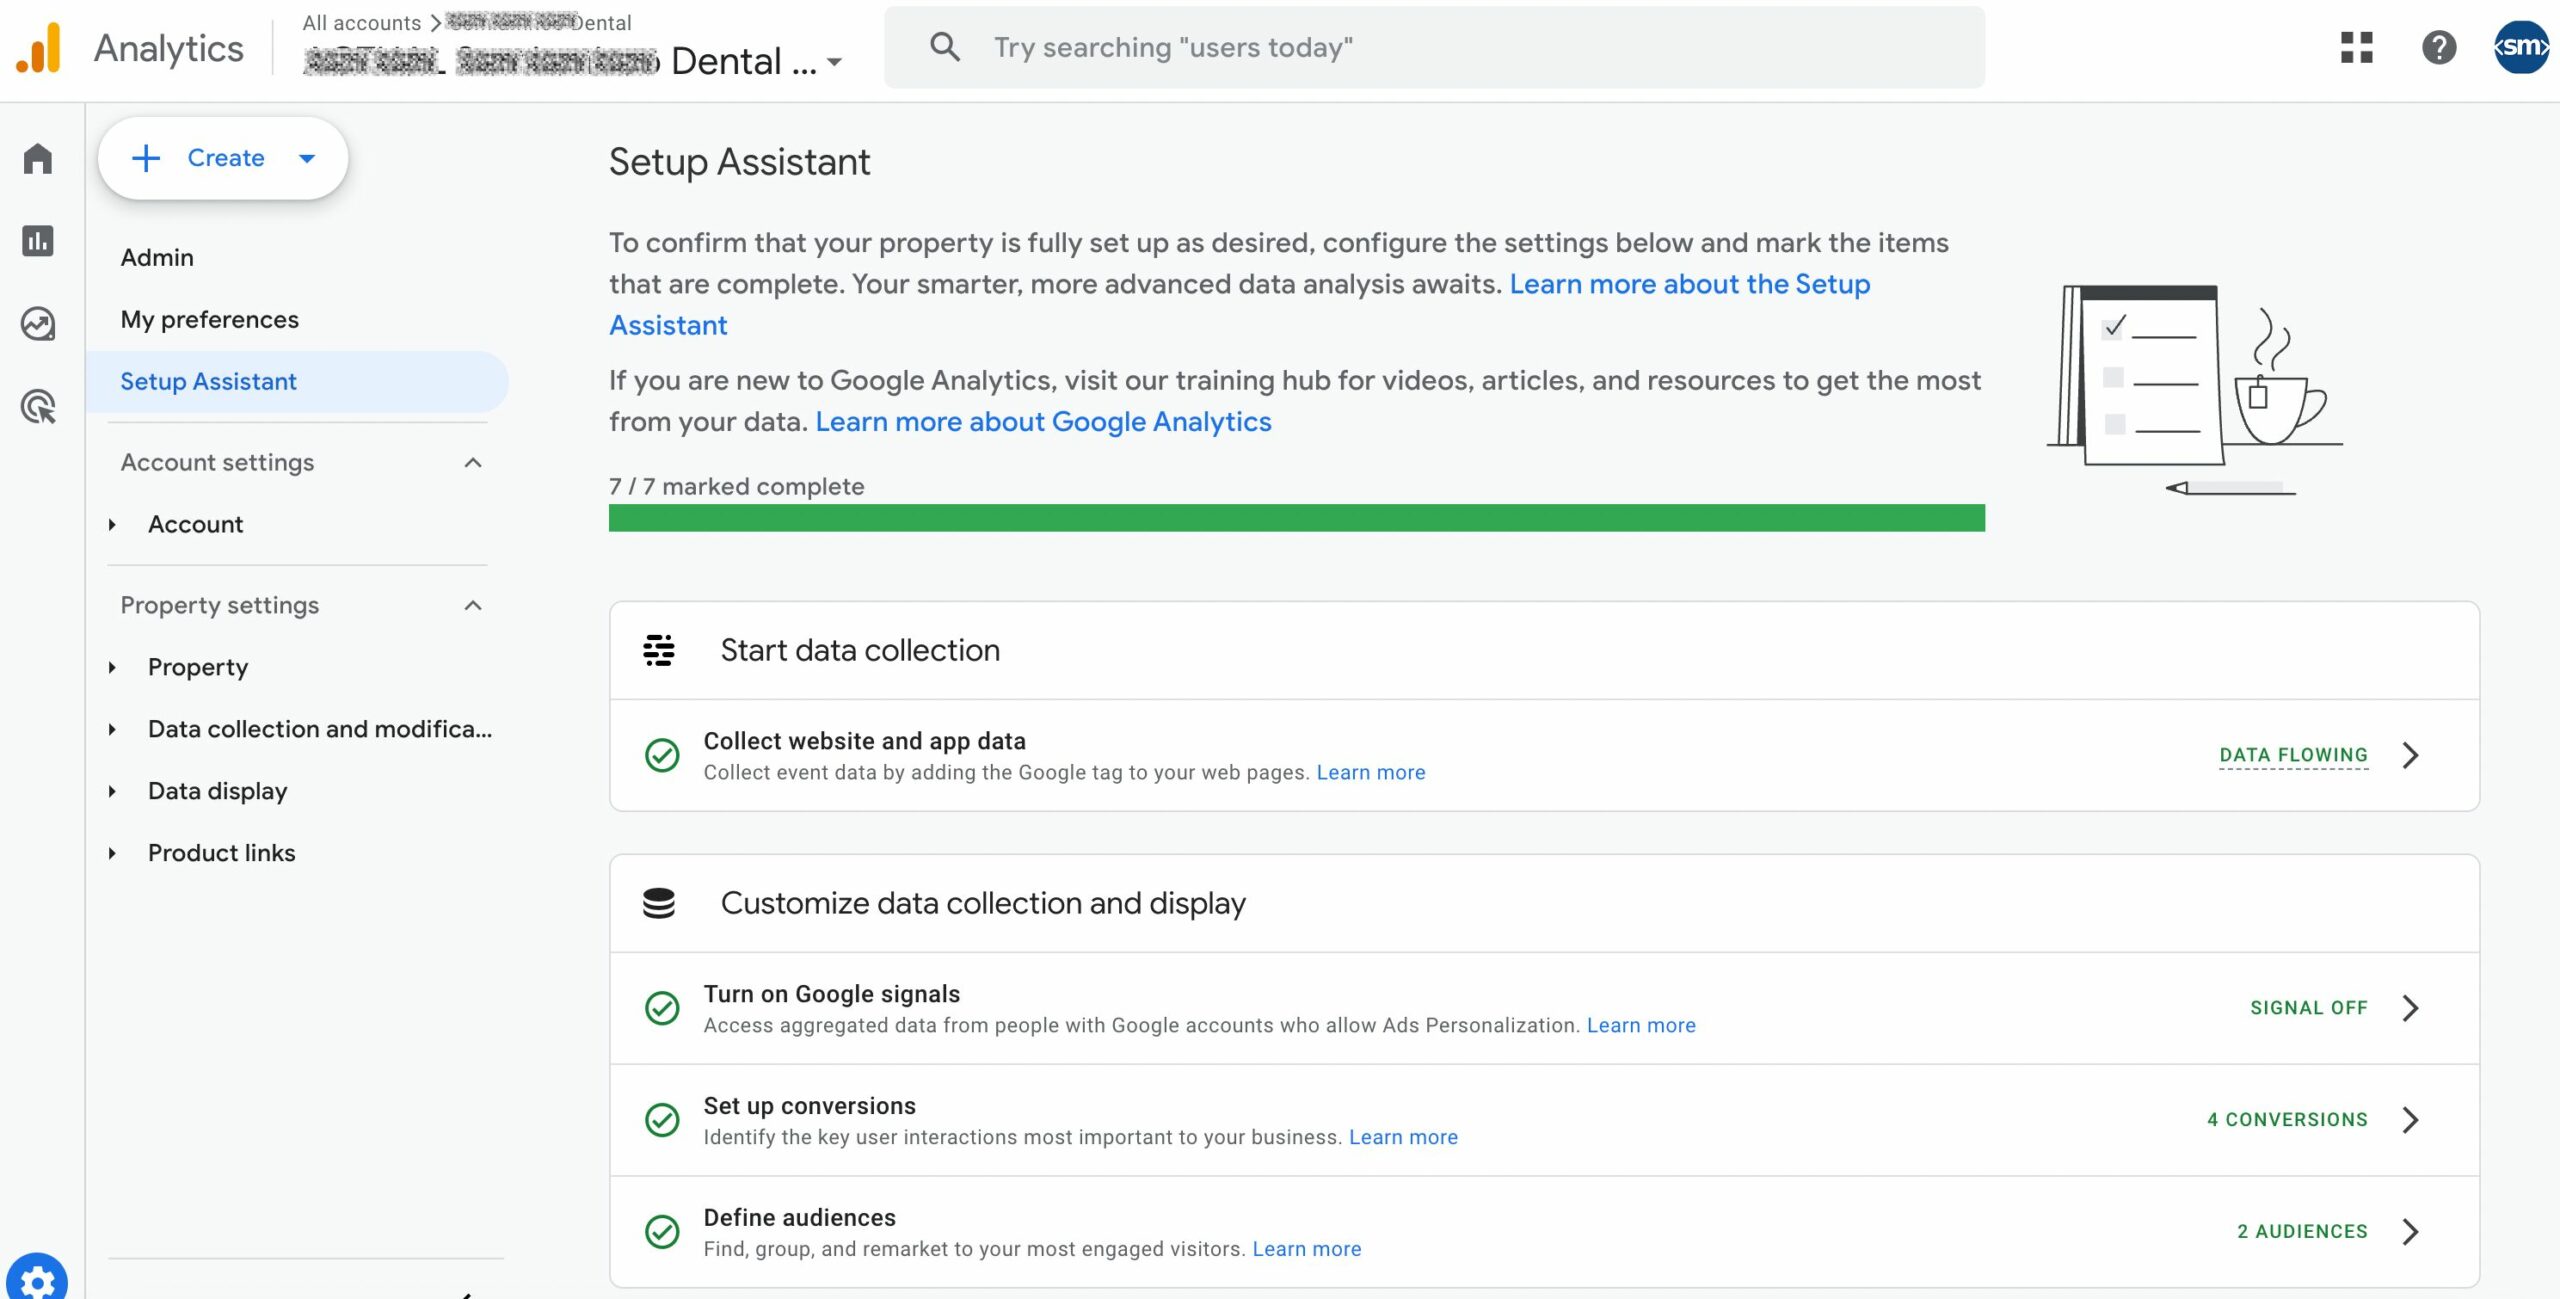 Finalized GA4 tracking setup for dental website in order to proceed to SEO